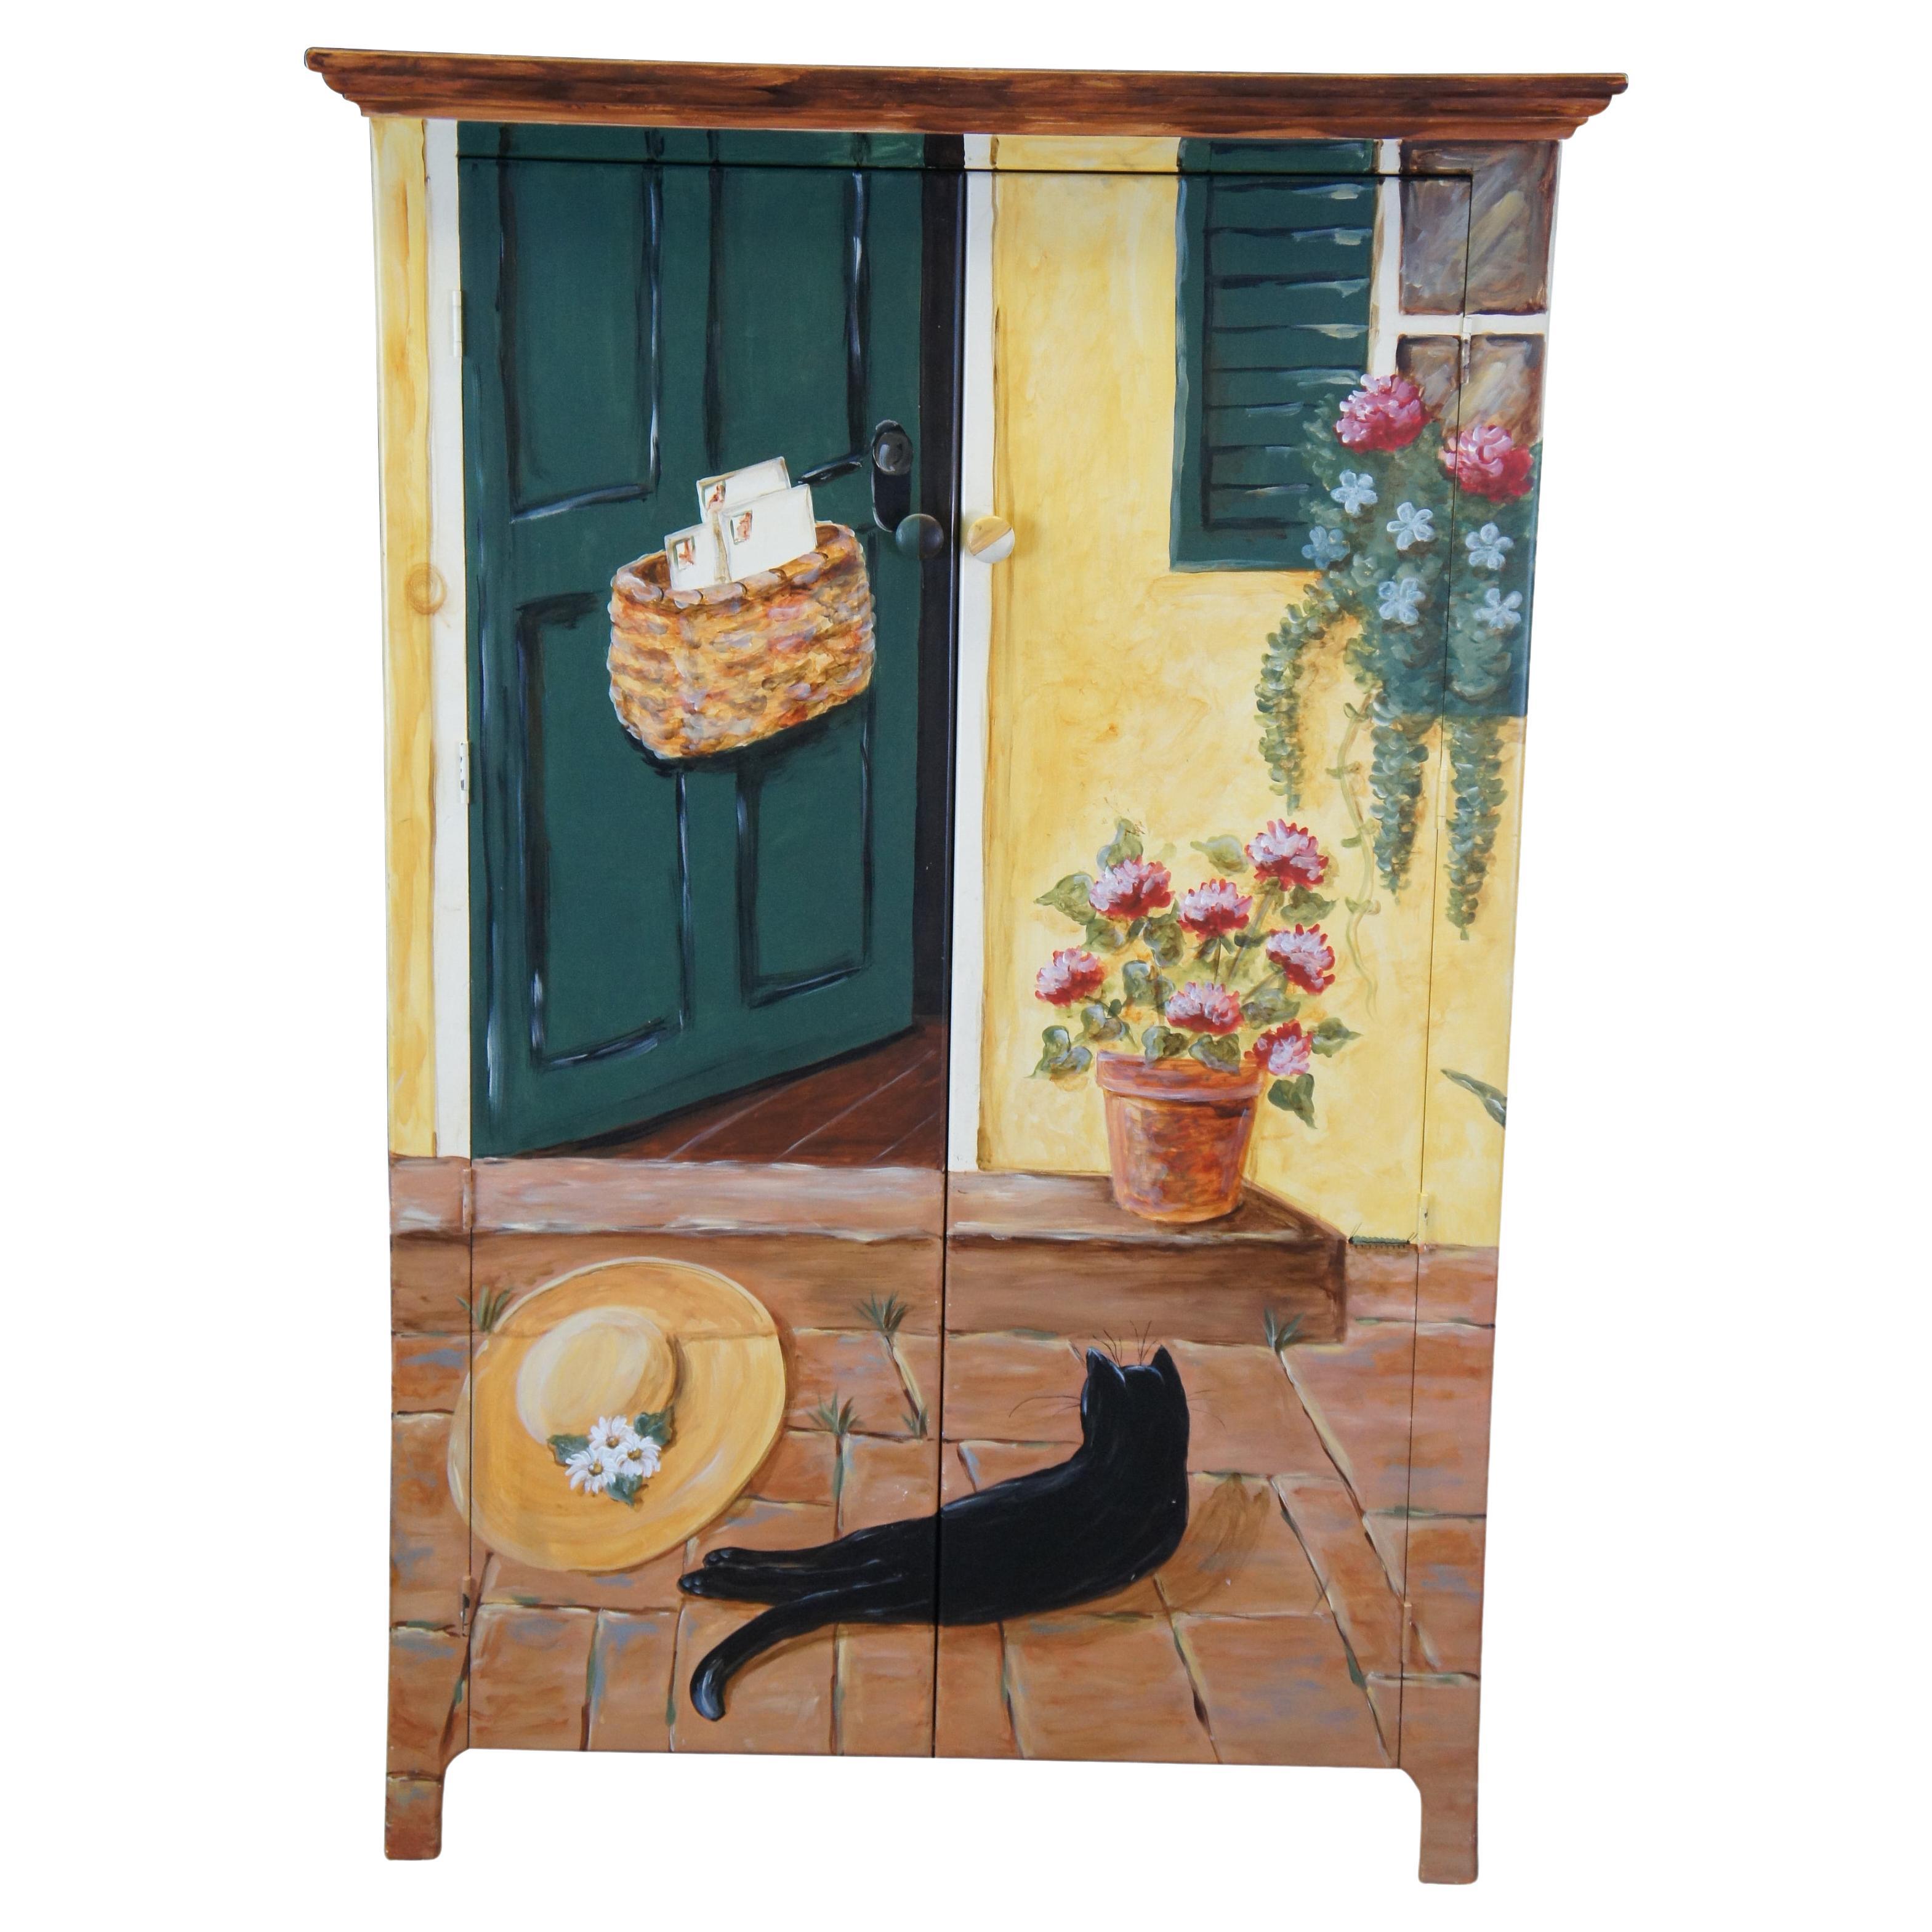 Vintage Arhaus Camden Field Collection armoire, cabinet or linen press featuring a painted farmhouse cottage scene with an open door, blooming flowers, and lounging black cat sunbathing on the bricks of the stoop next to the gardeners hat. circa